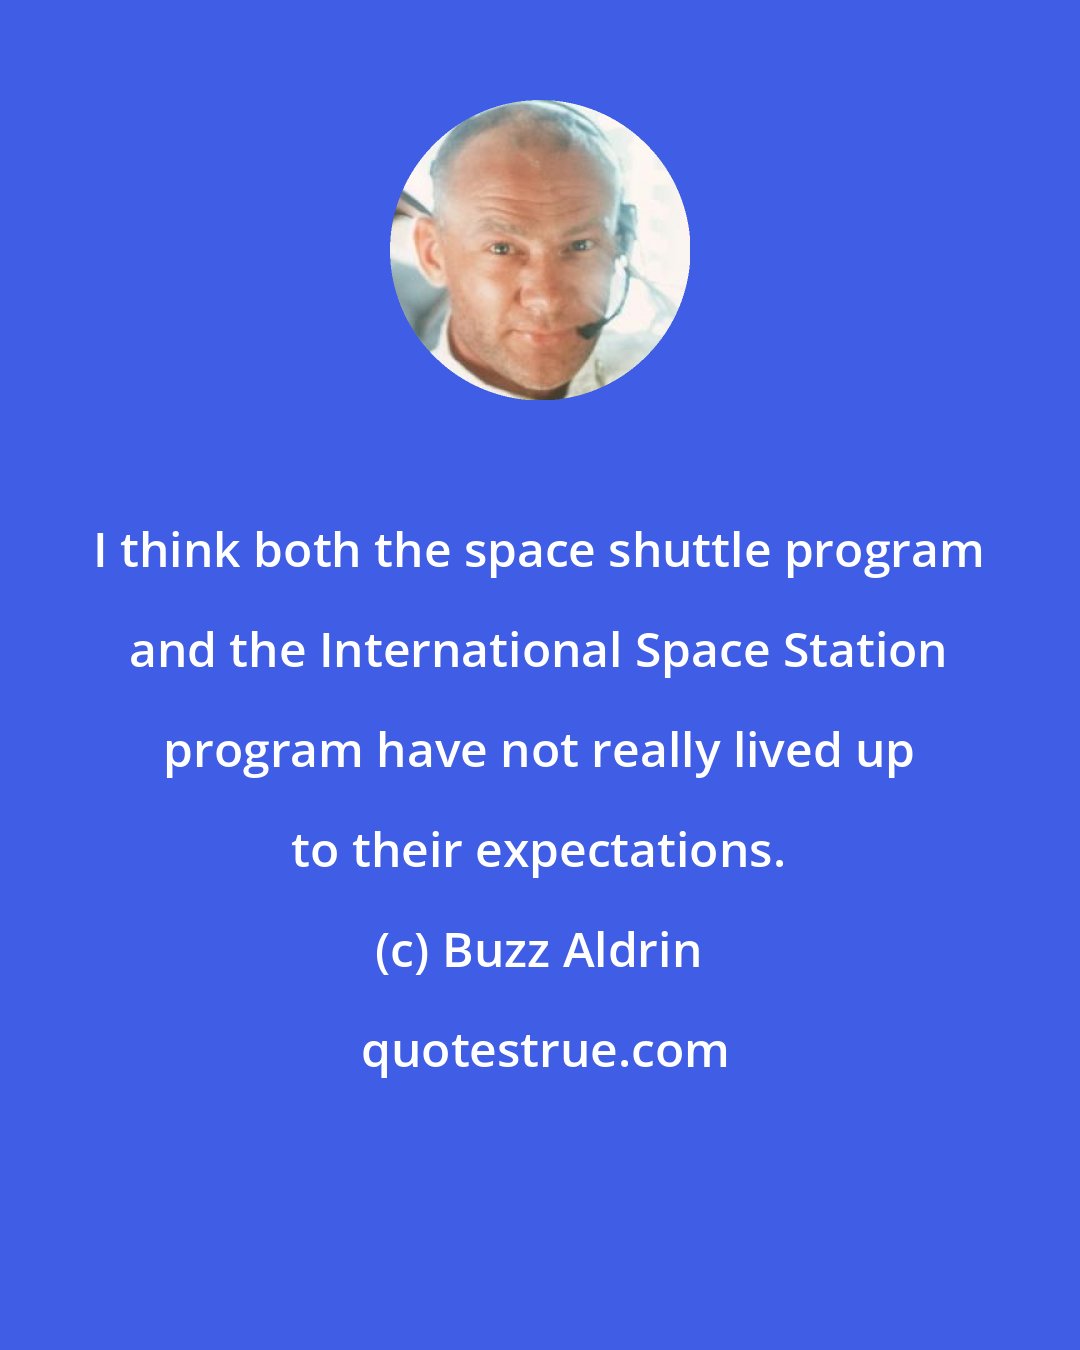 Buzz Aldrin: I think both the space shuttle program and the International Space Station program have not really lived up to their expectations.